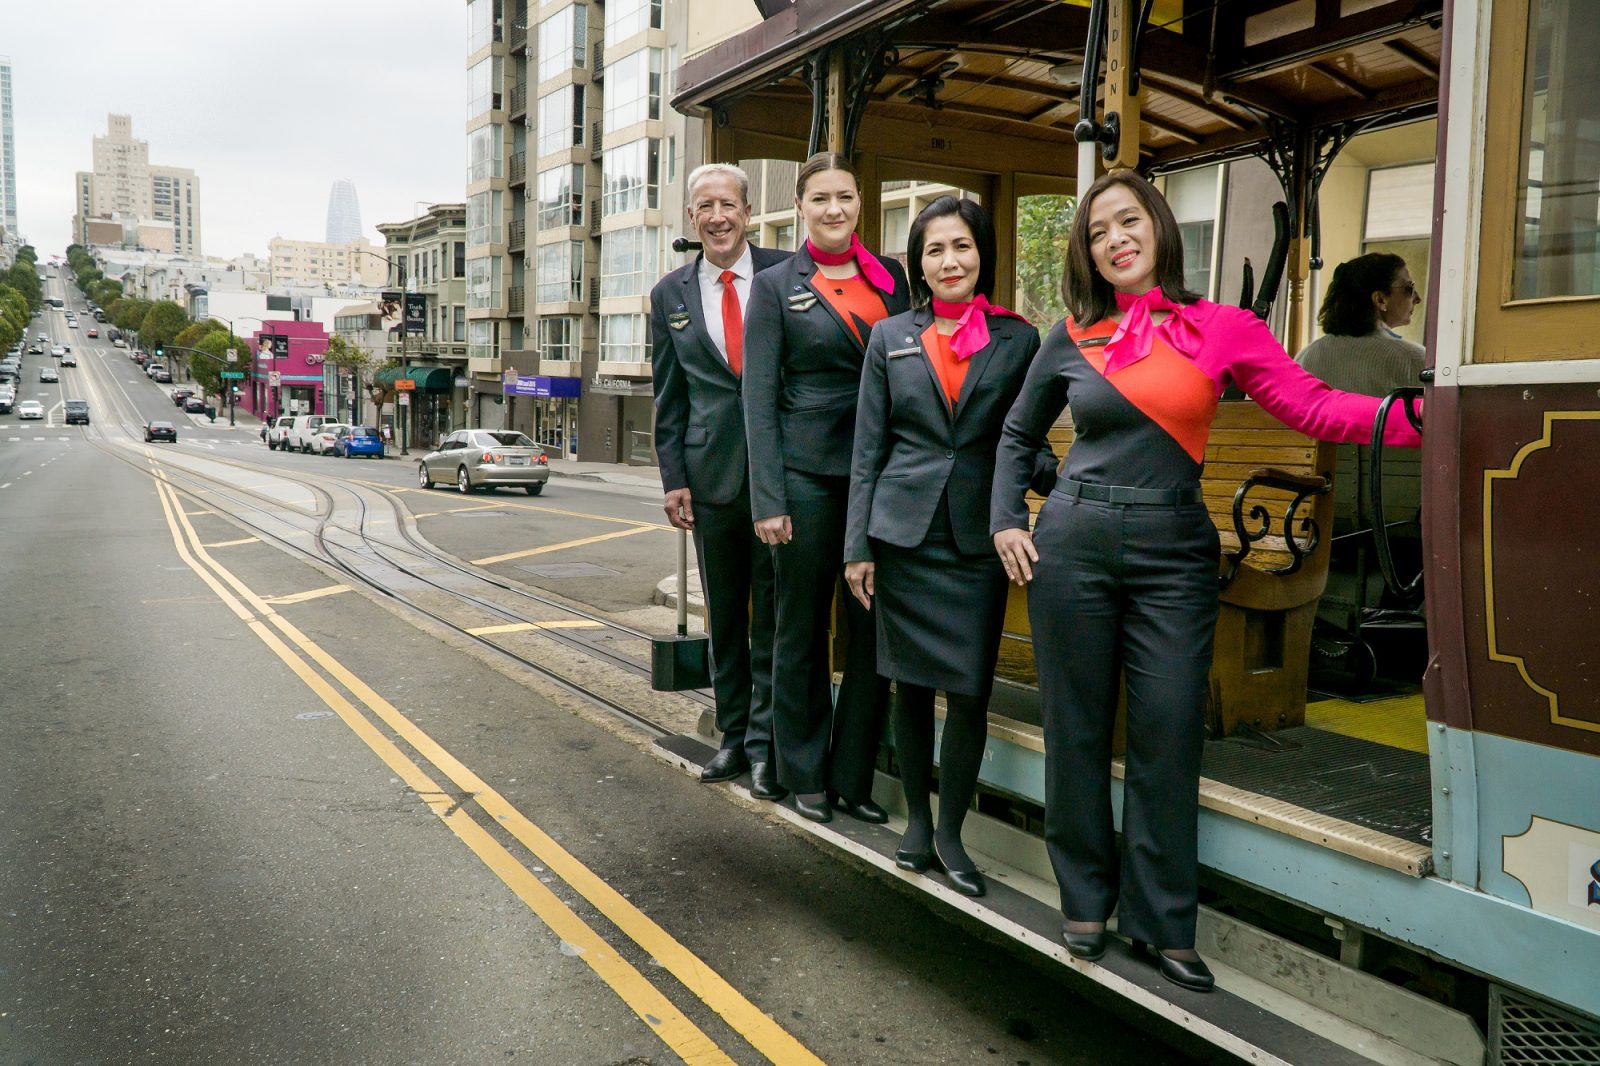 Qantas is Recruiting New Zealand-Based Cabin Crew for Trans-Tasman and International Routes